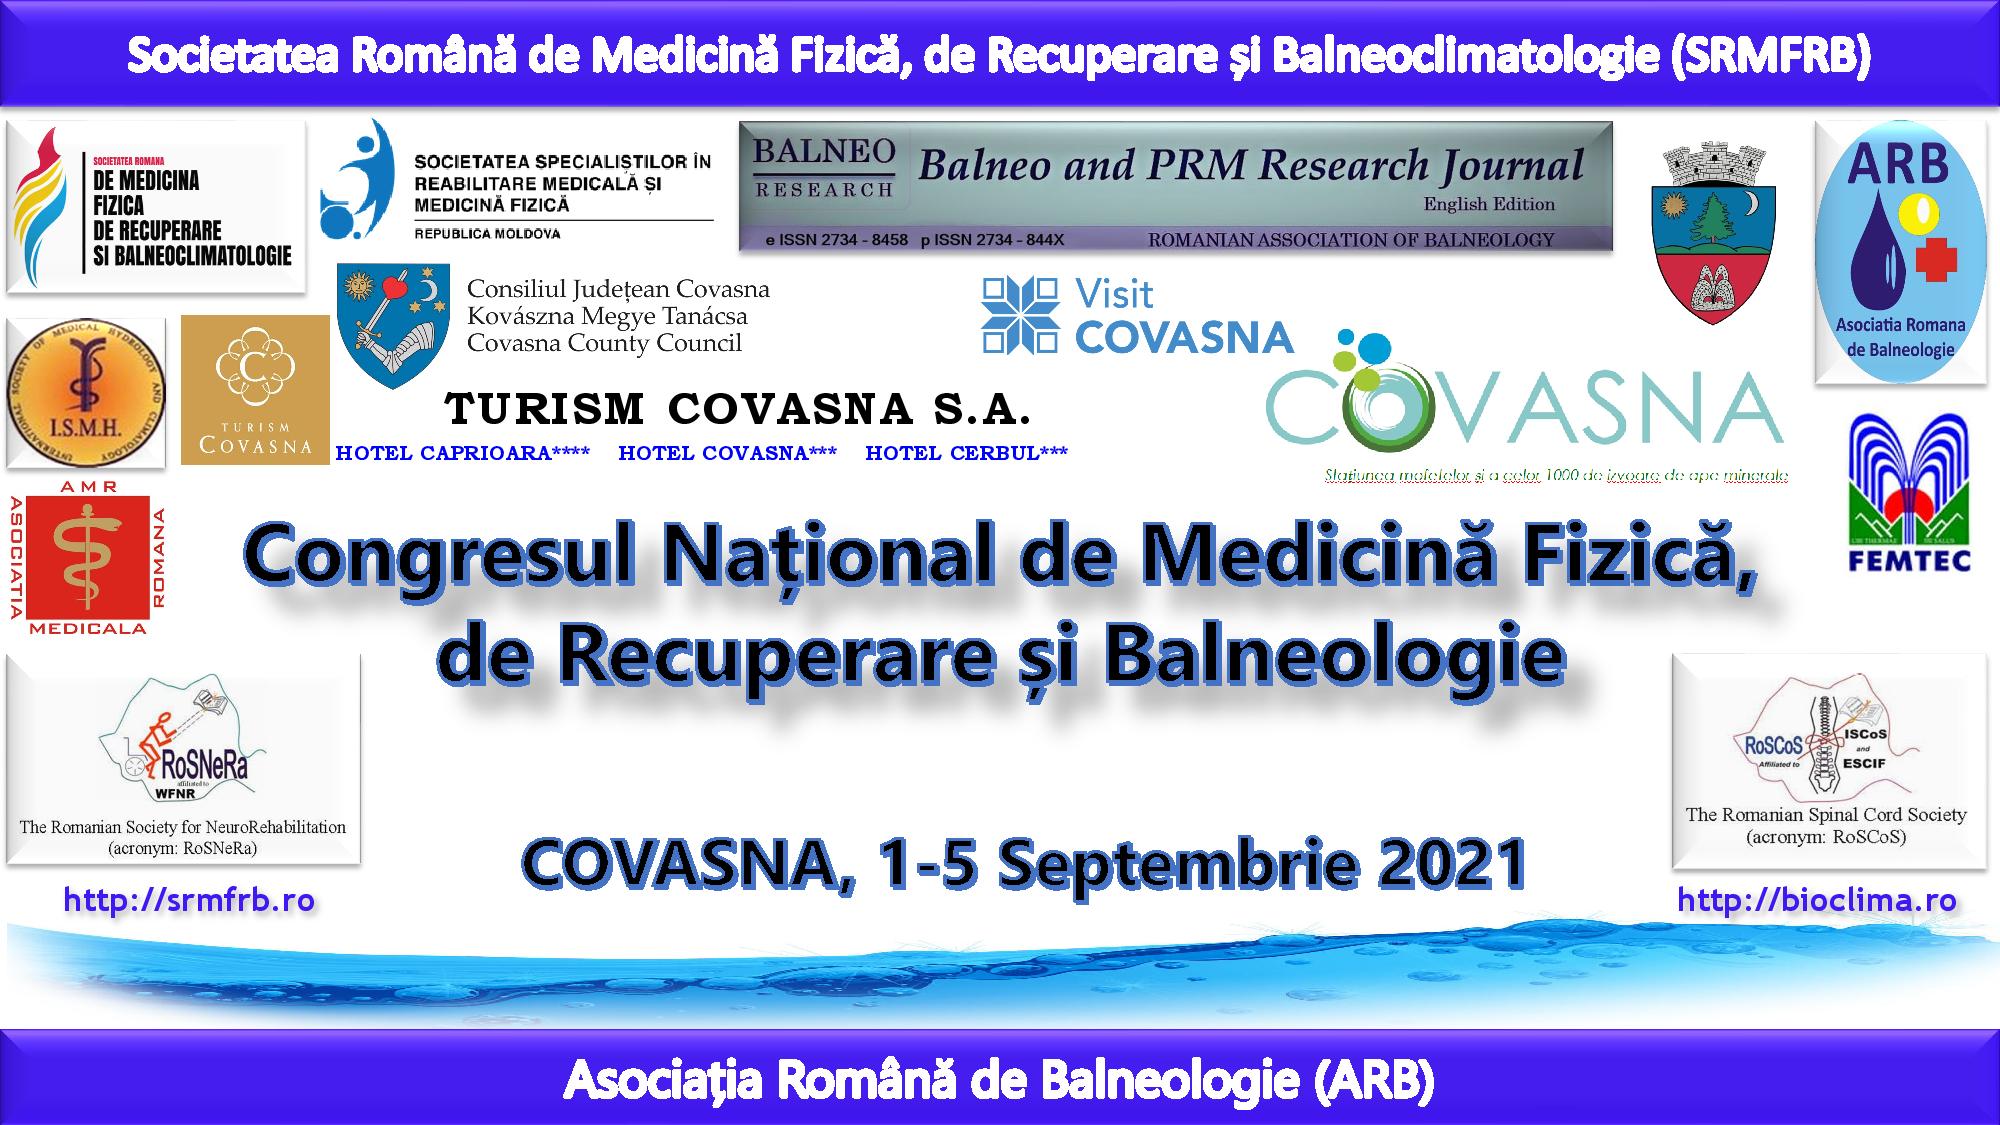 National Congress of Physical Medicine, Recovery and Balneology